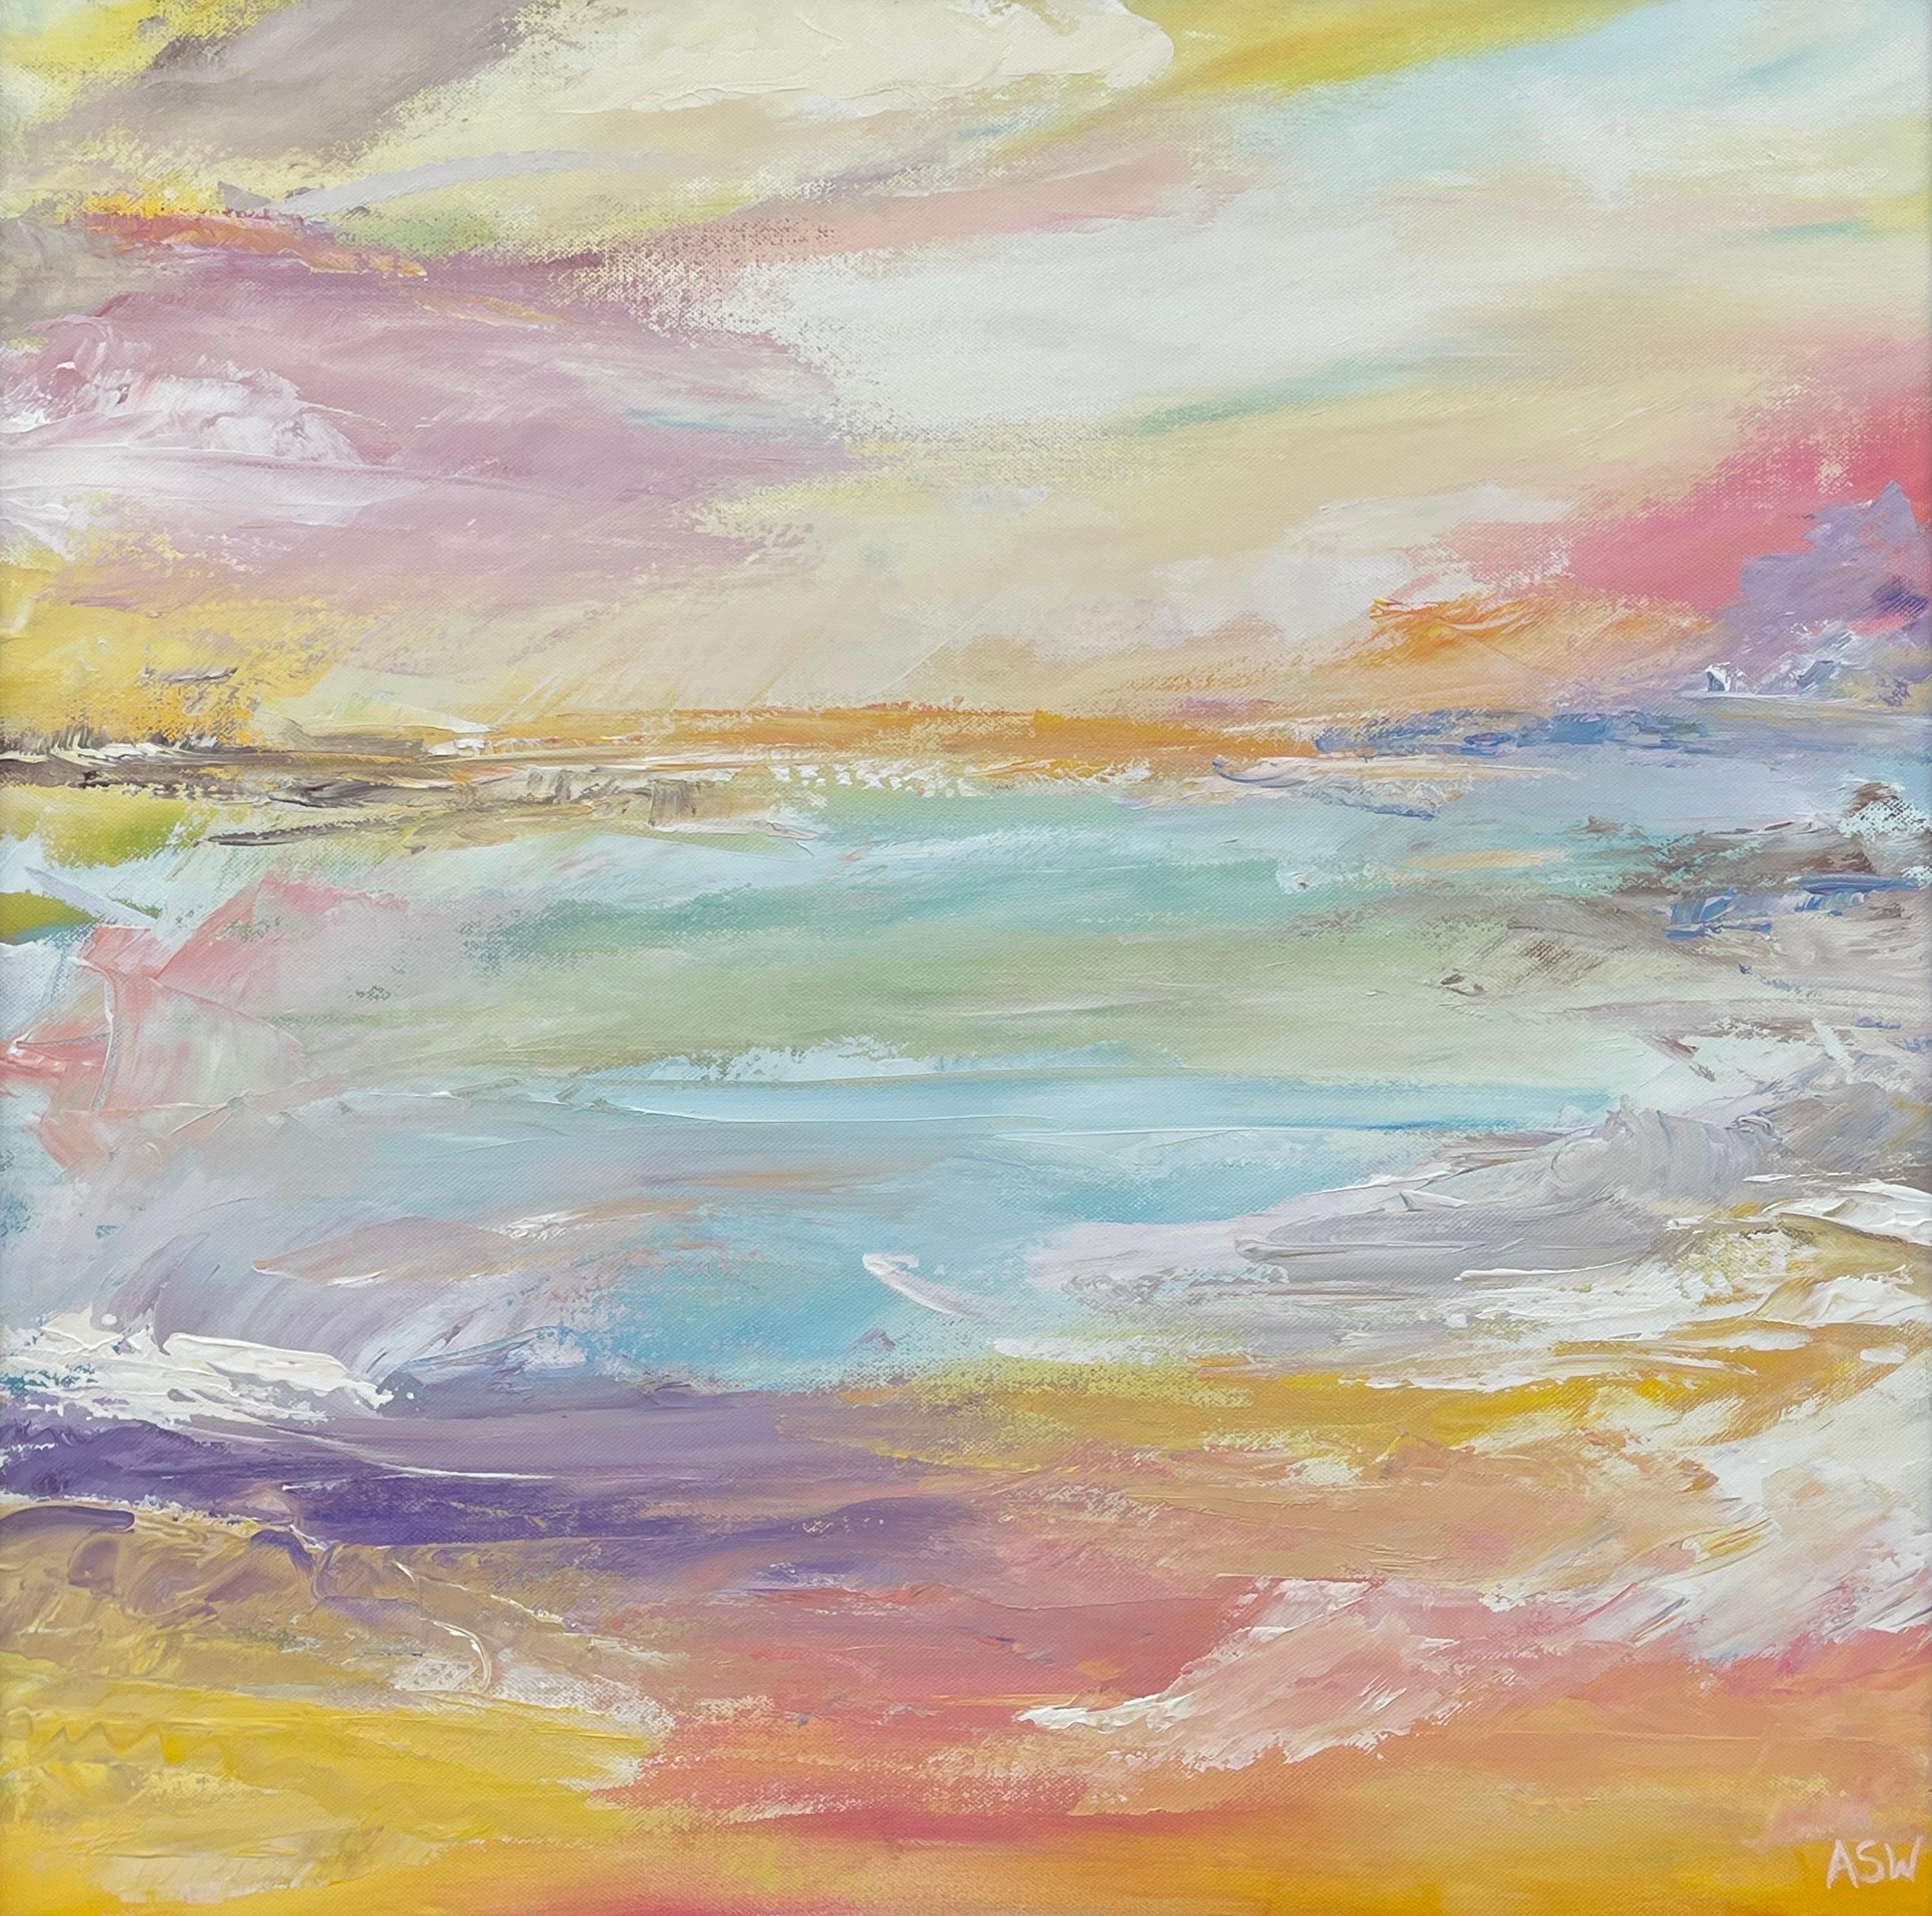 Serene Abstract Impressionist Seascape Landscape by Contemporary British Artist For Sale 8